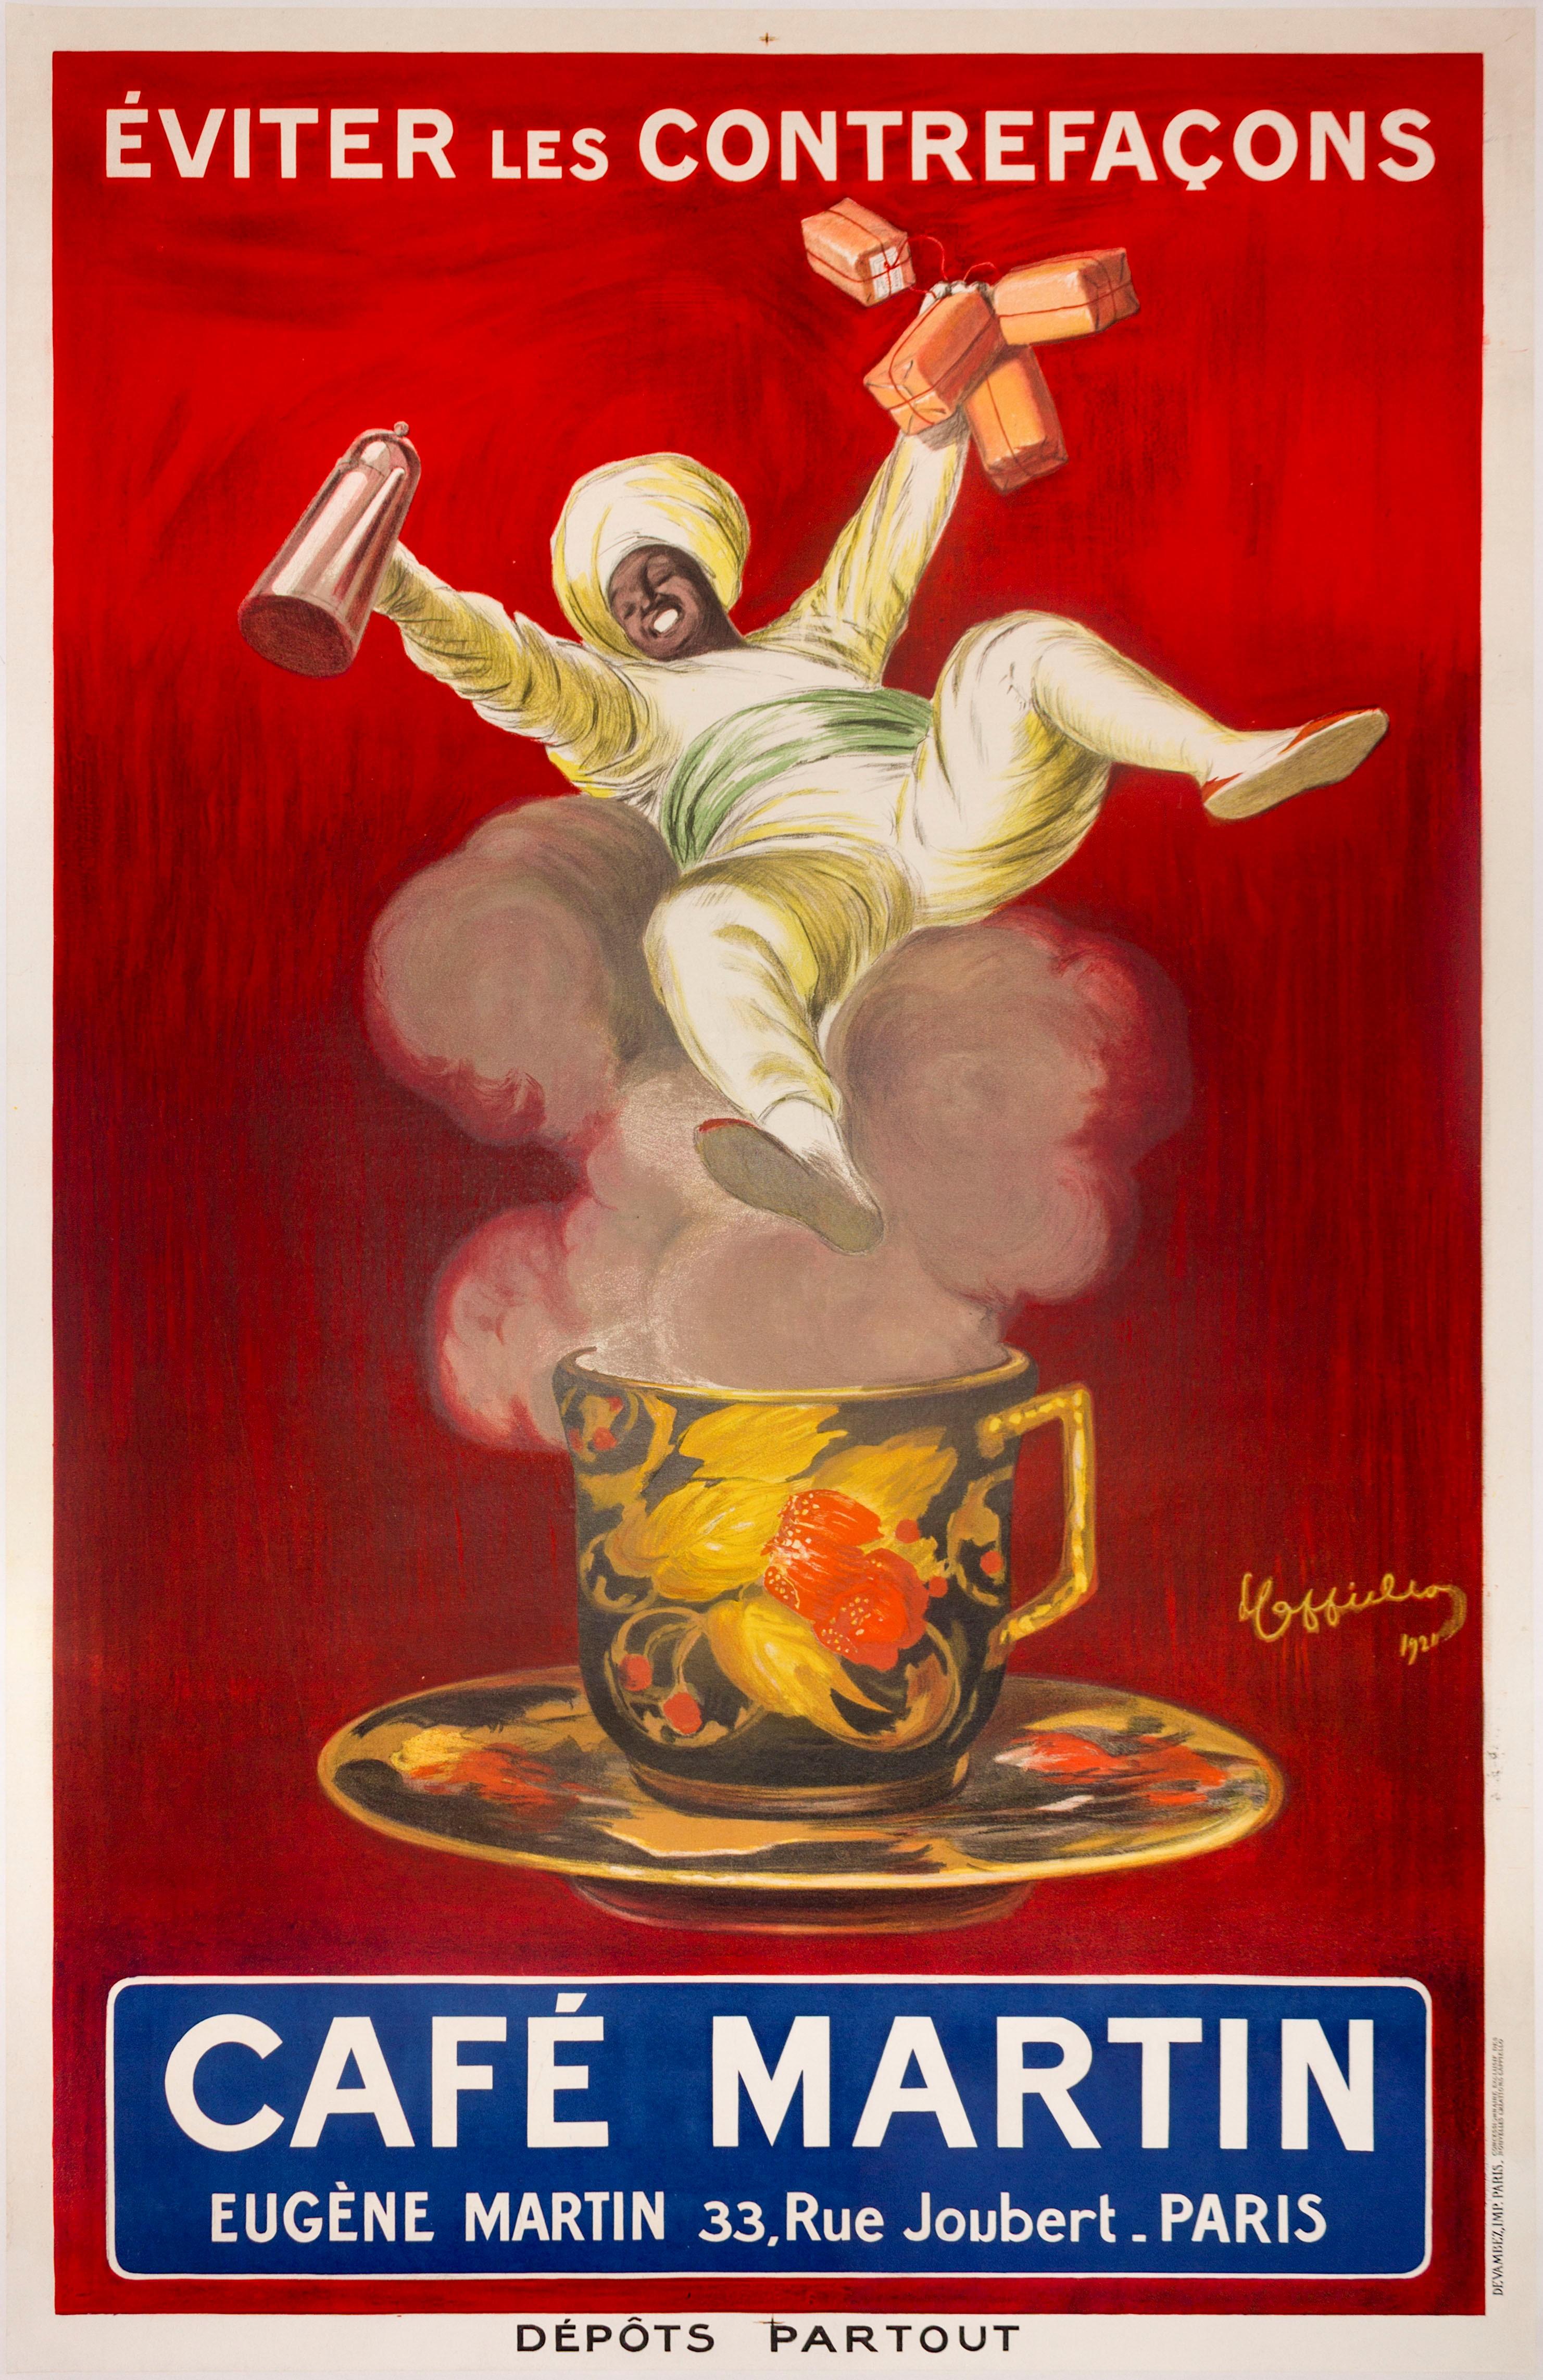 https://a.1stdibscdn.com/leonetto-cappiello-prints-works-on-paper-cafe-martin-large-original-vintage-turkish-coffee-poster-1920s-for-sale/a_13322/a_86174821628906966813/FRX11624_master.jpg